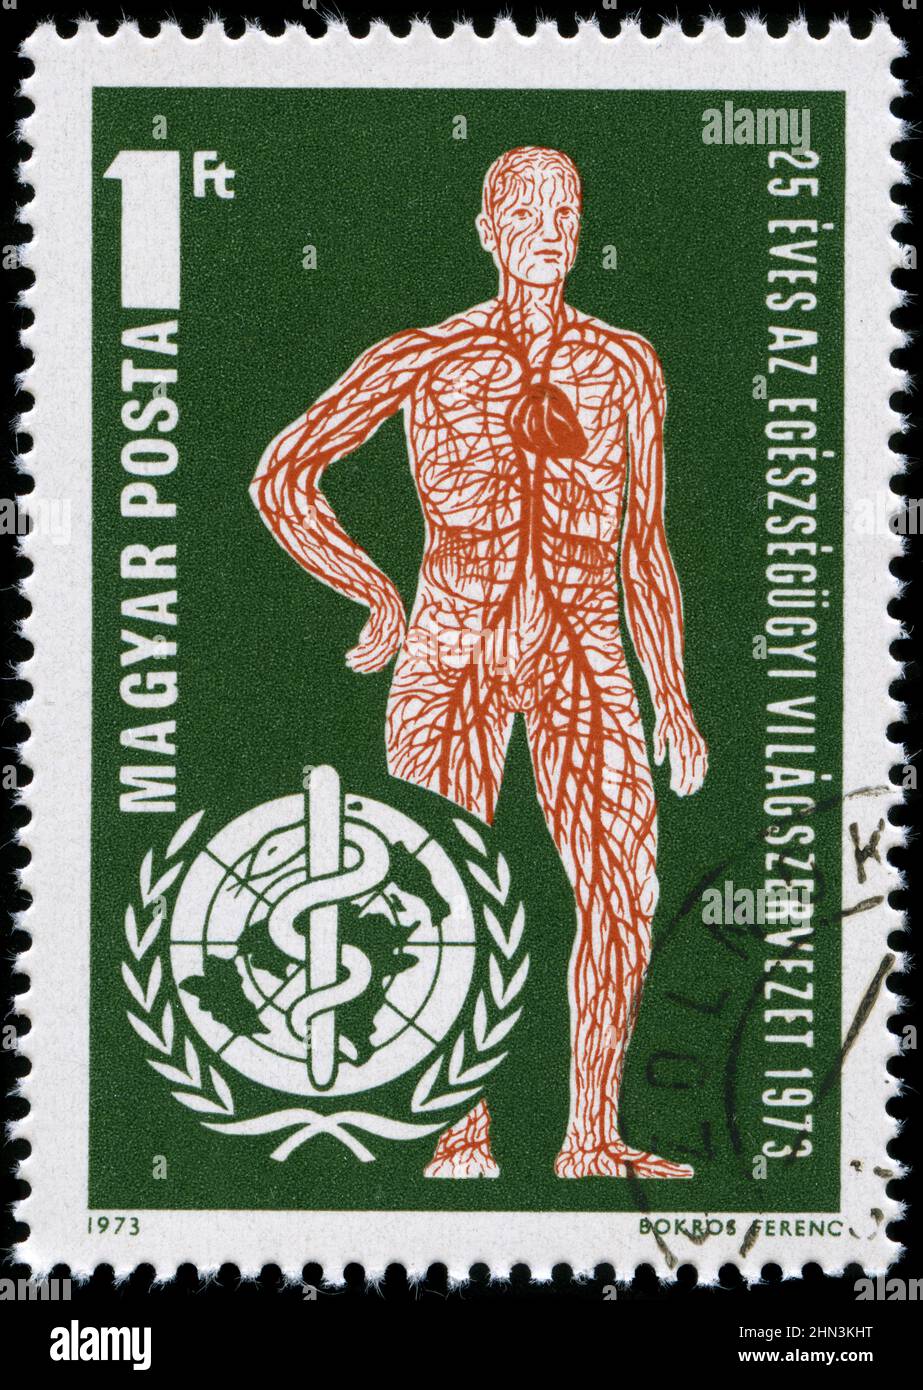 Postage stamp from Hungary in the 25th Anniversary of the WHO  series issued in 1973 Stock Photo